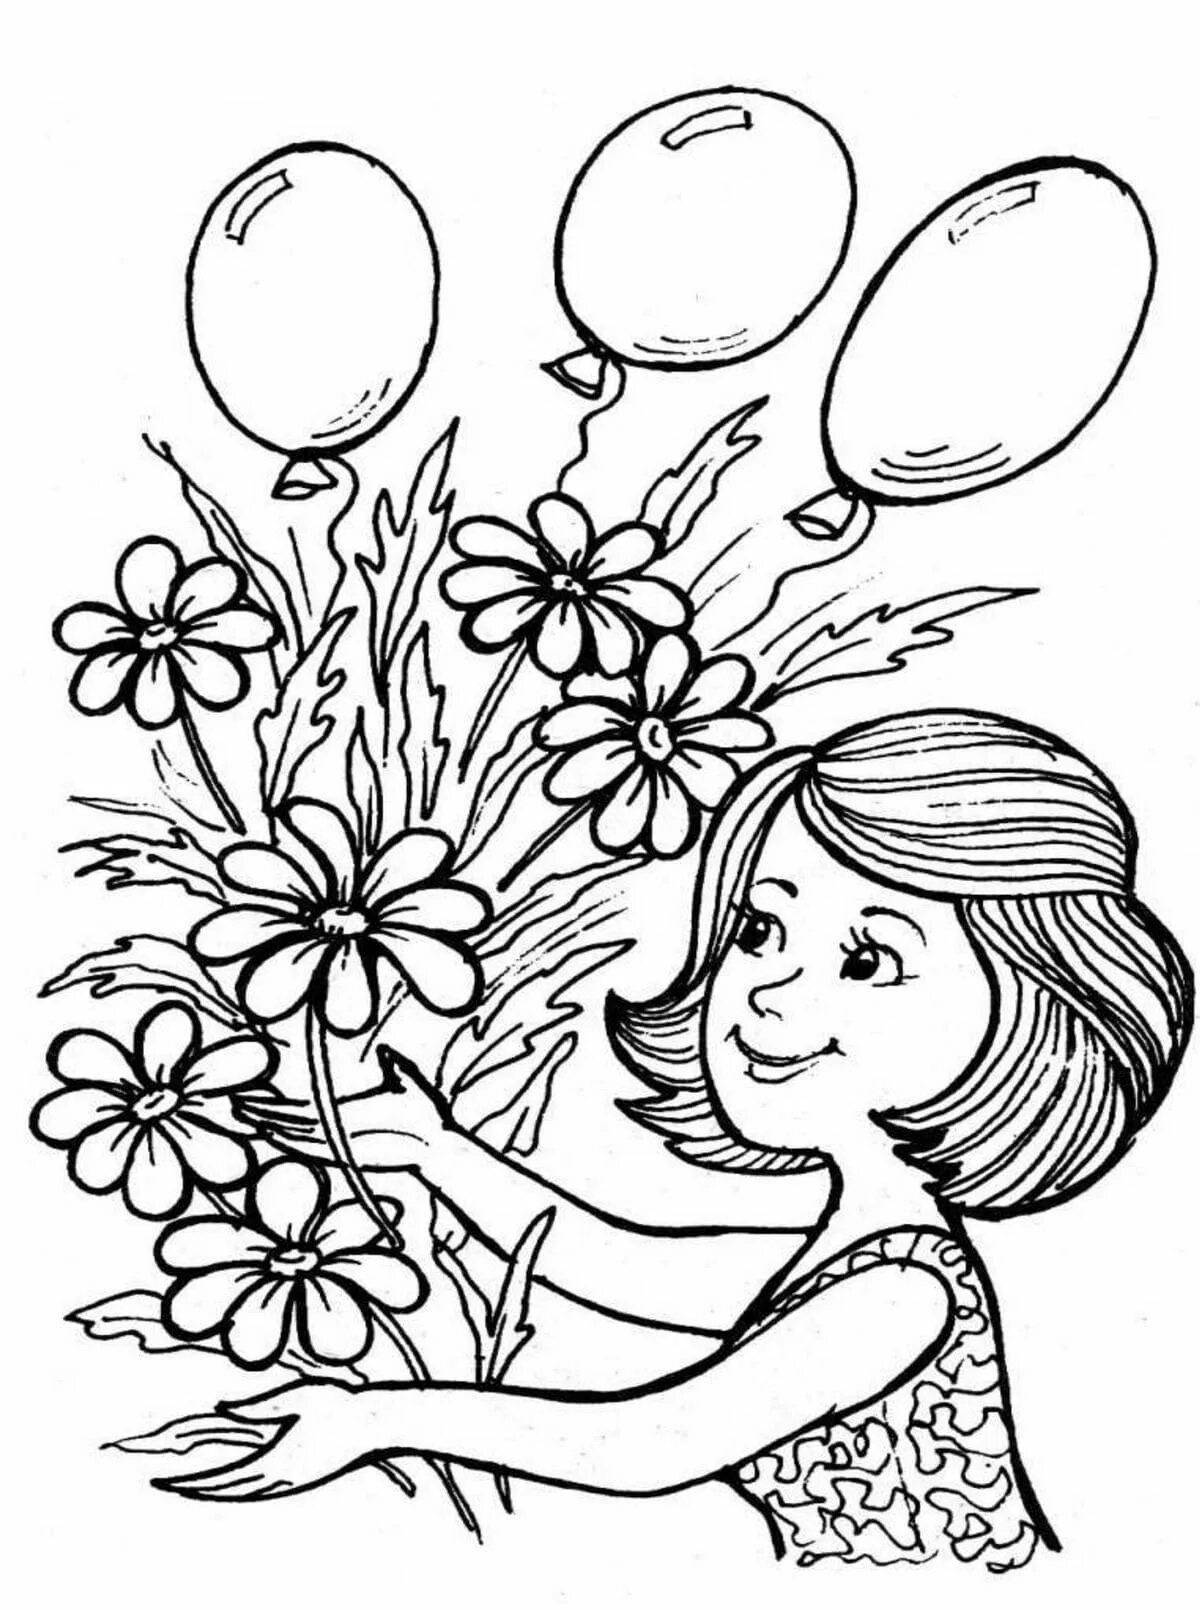 Creative March 8 coloring book for kids 6-7 years old